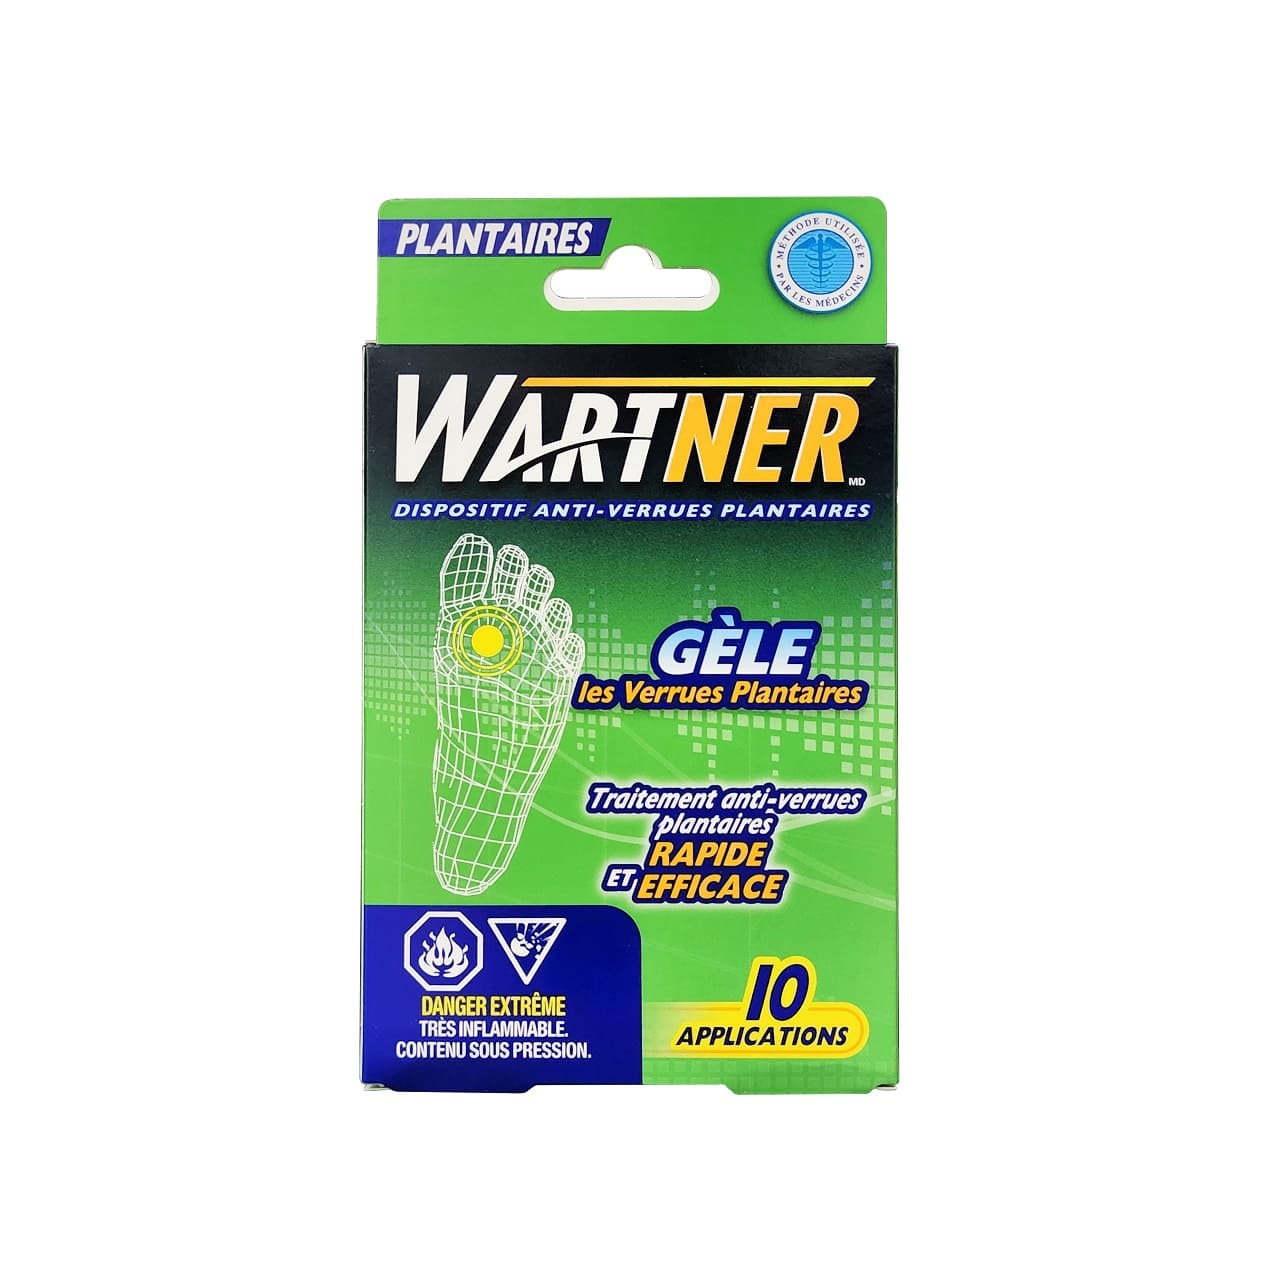 Product label for Wartner Plantar Wart Removal System (10 count) in French